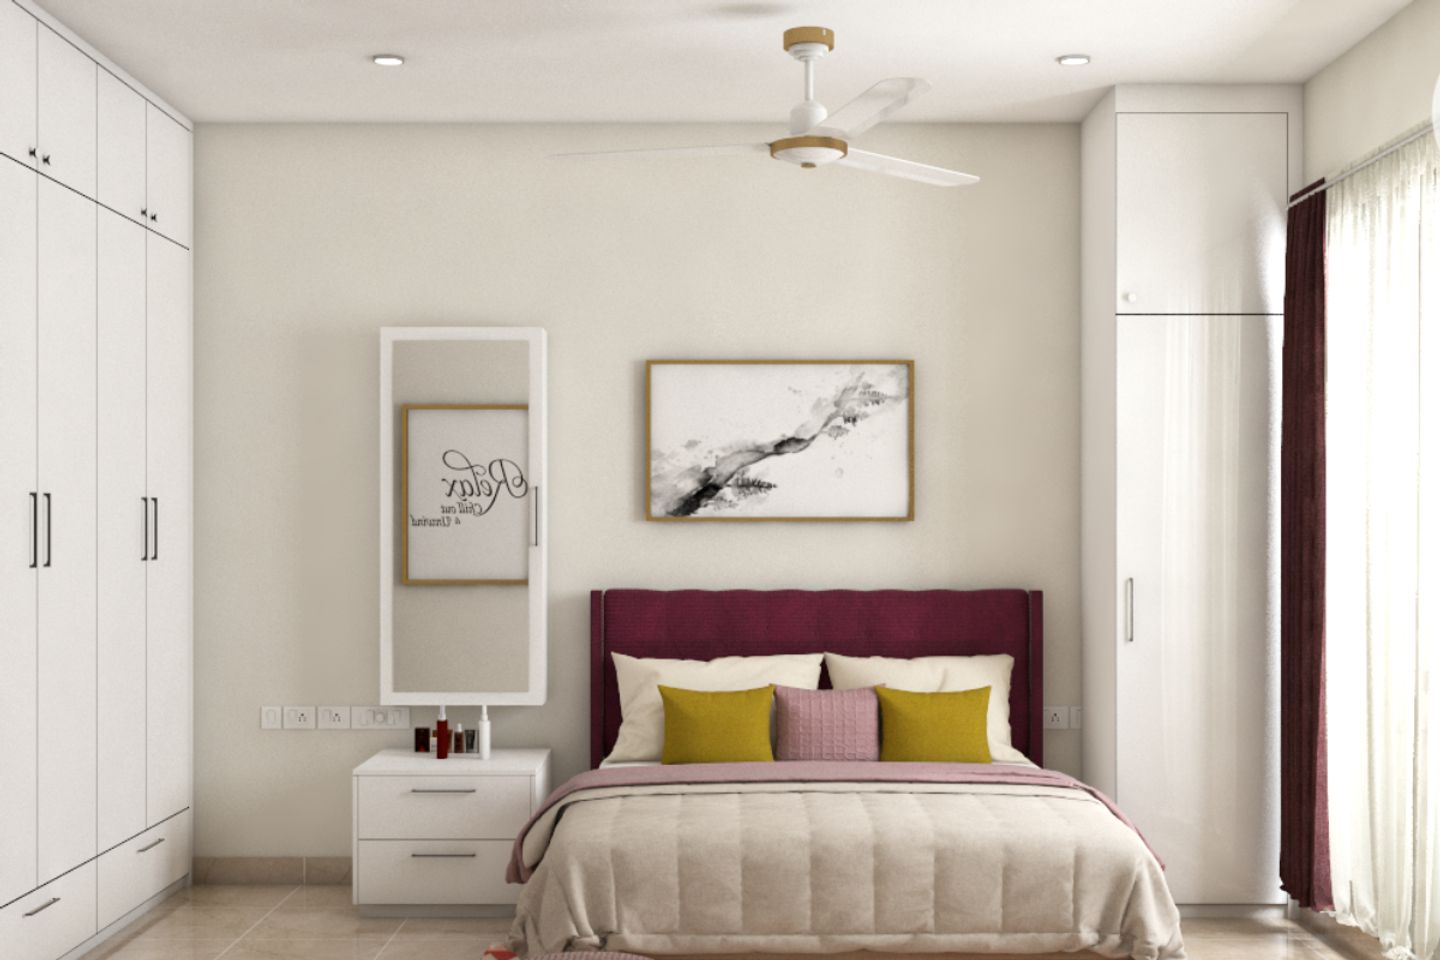 Guest Room With Recessed Lights - Livspace